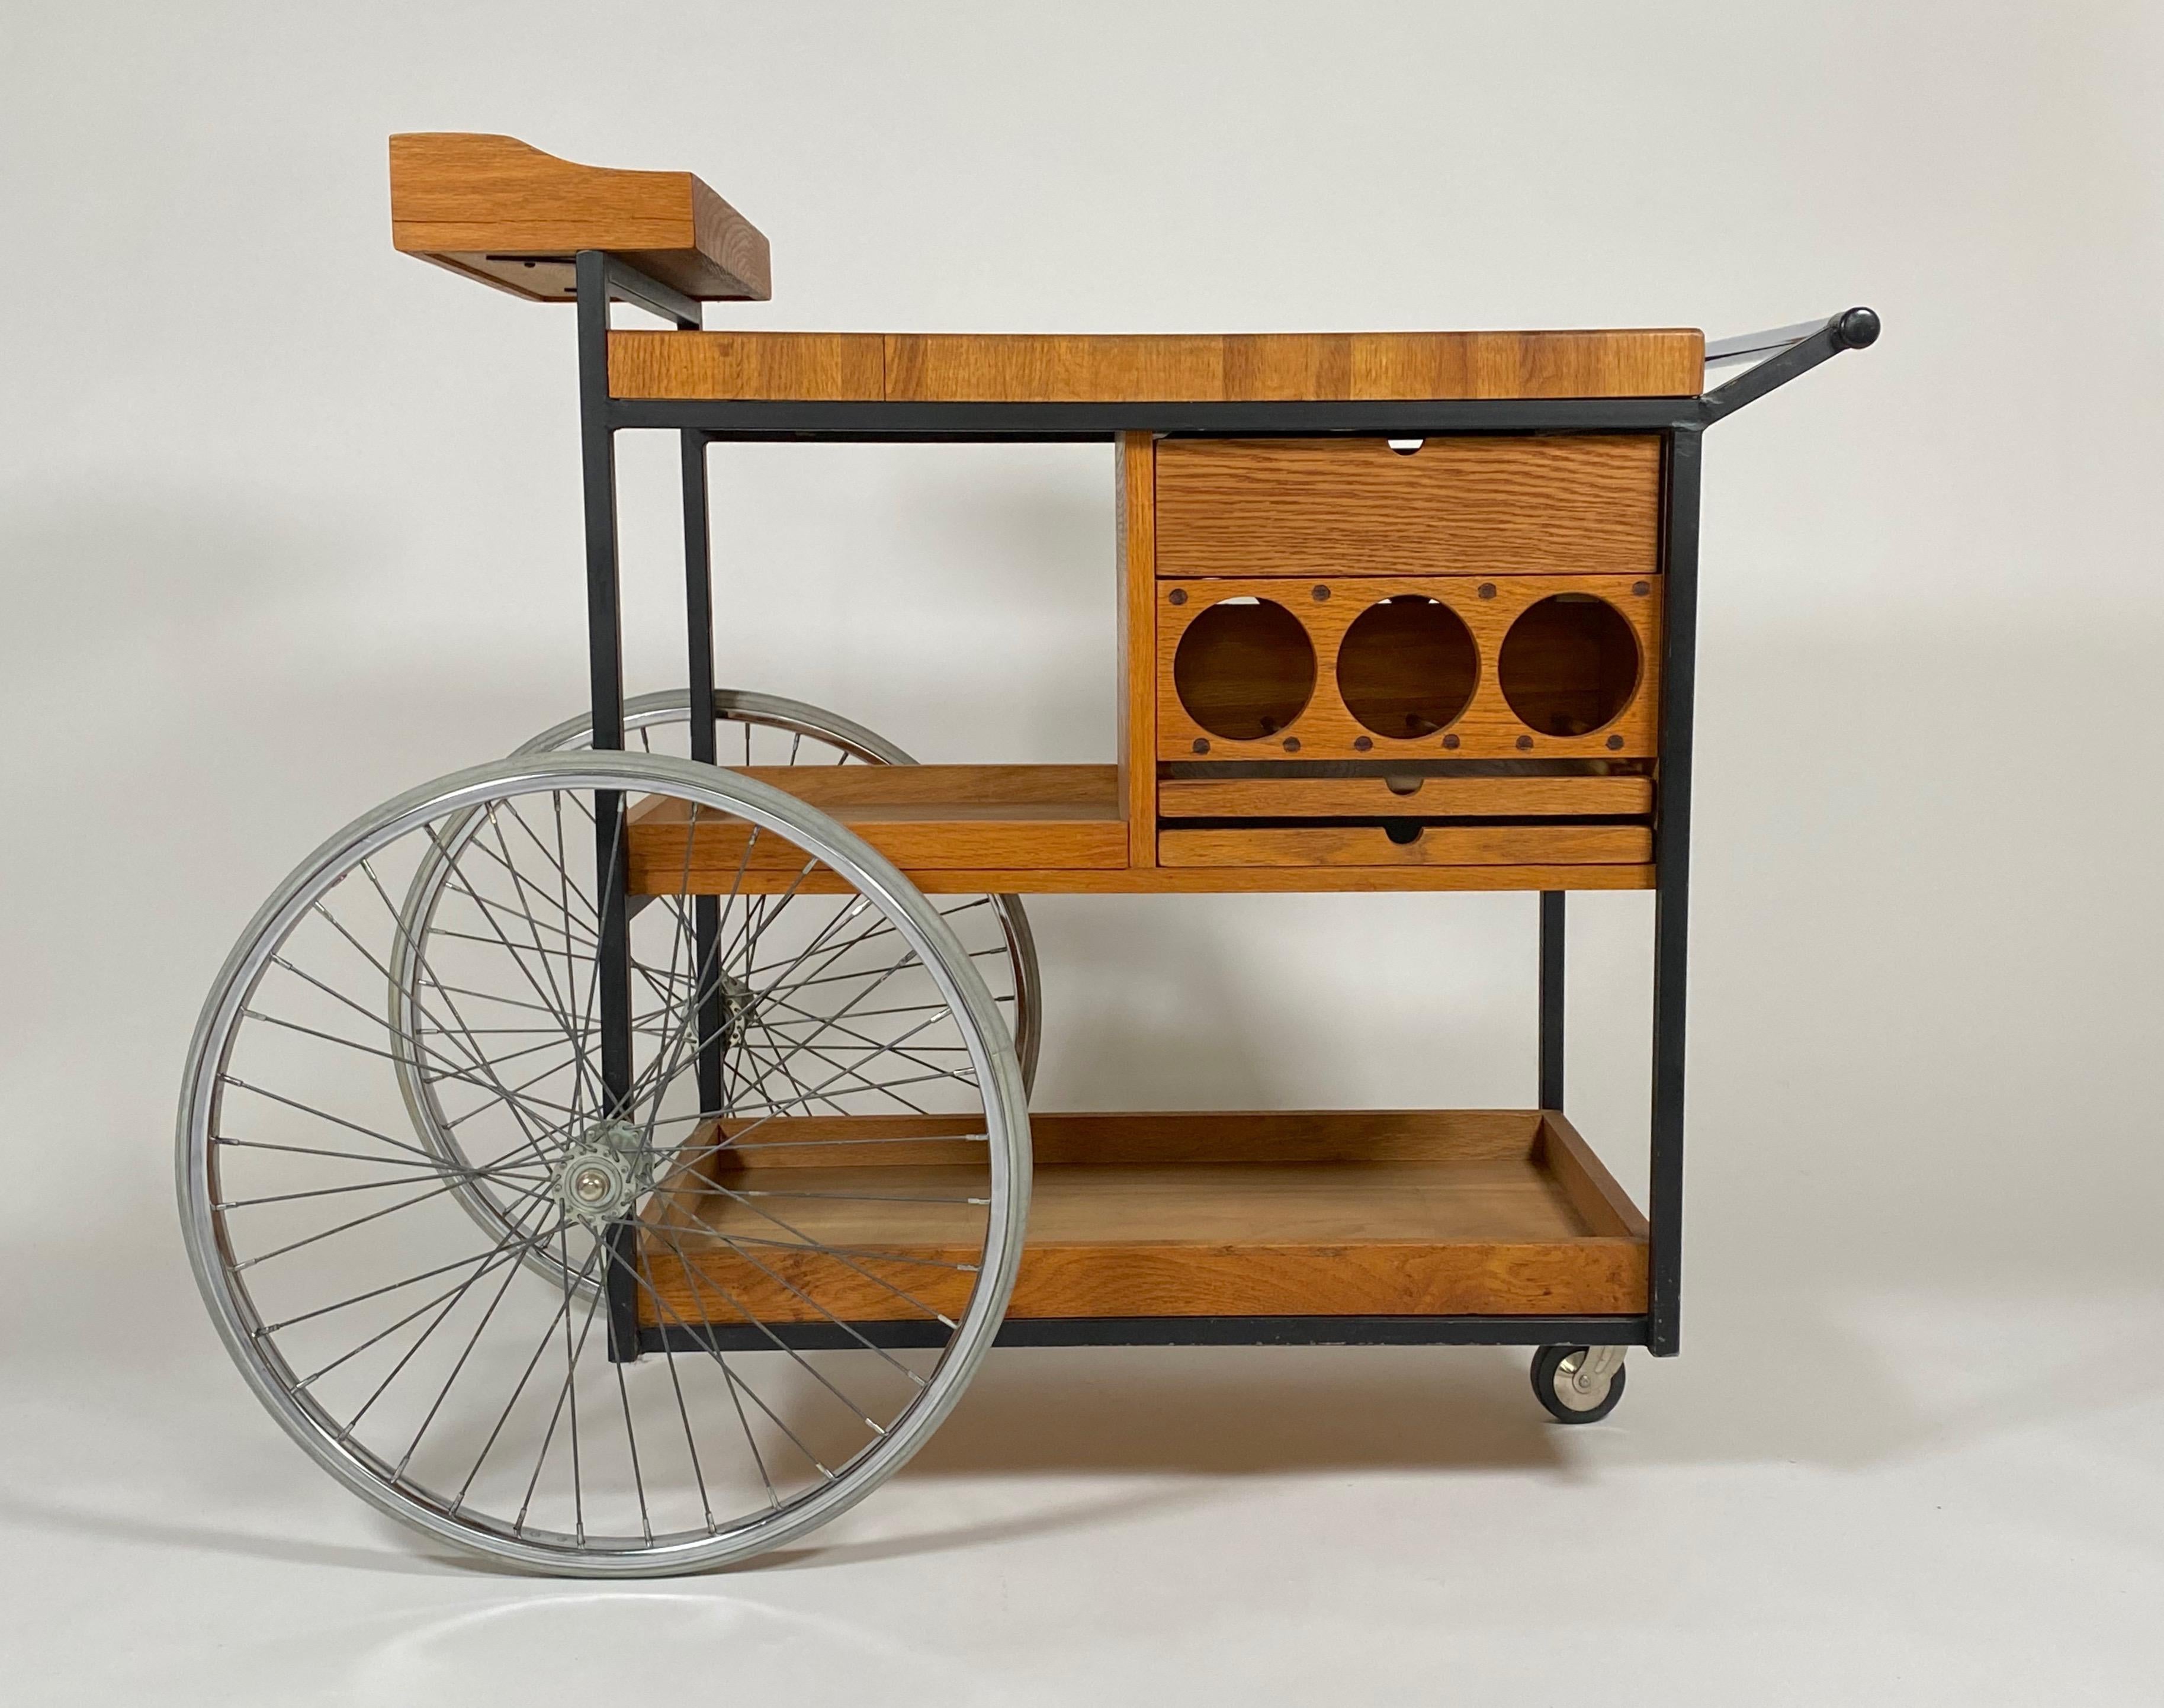 American designer Arthur Umanoff (1923-1985) serving / bar cart, constructed of an oak butcher block top, black lacquered metal frame, chrome and rubber wheels. The cart has three drawers for the storage of objects related to bar service and three